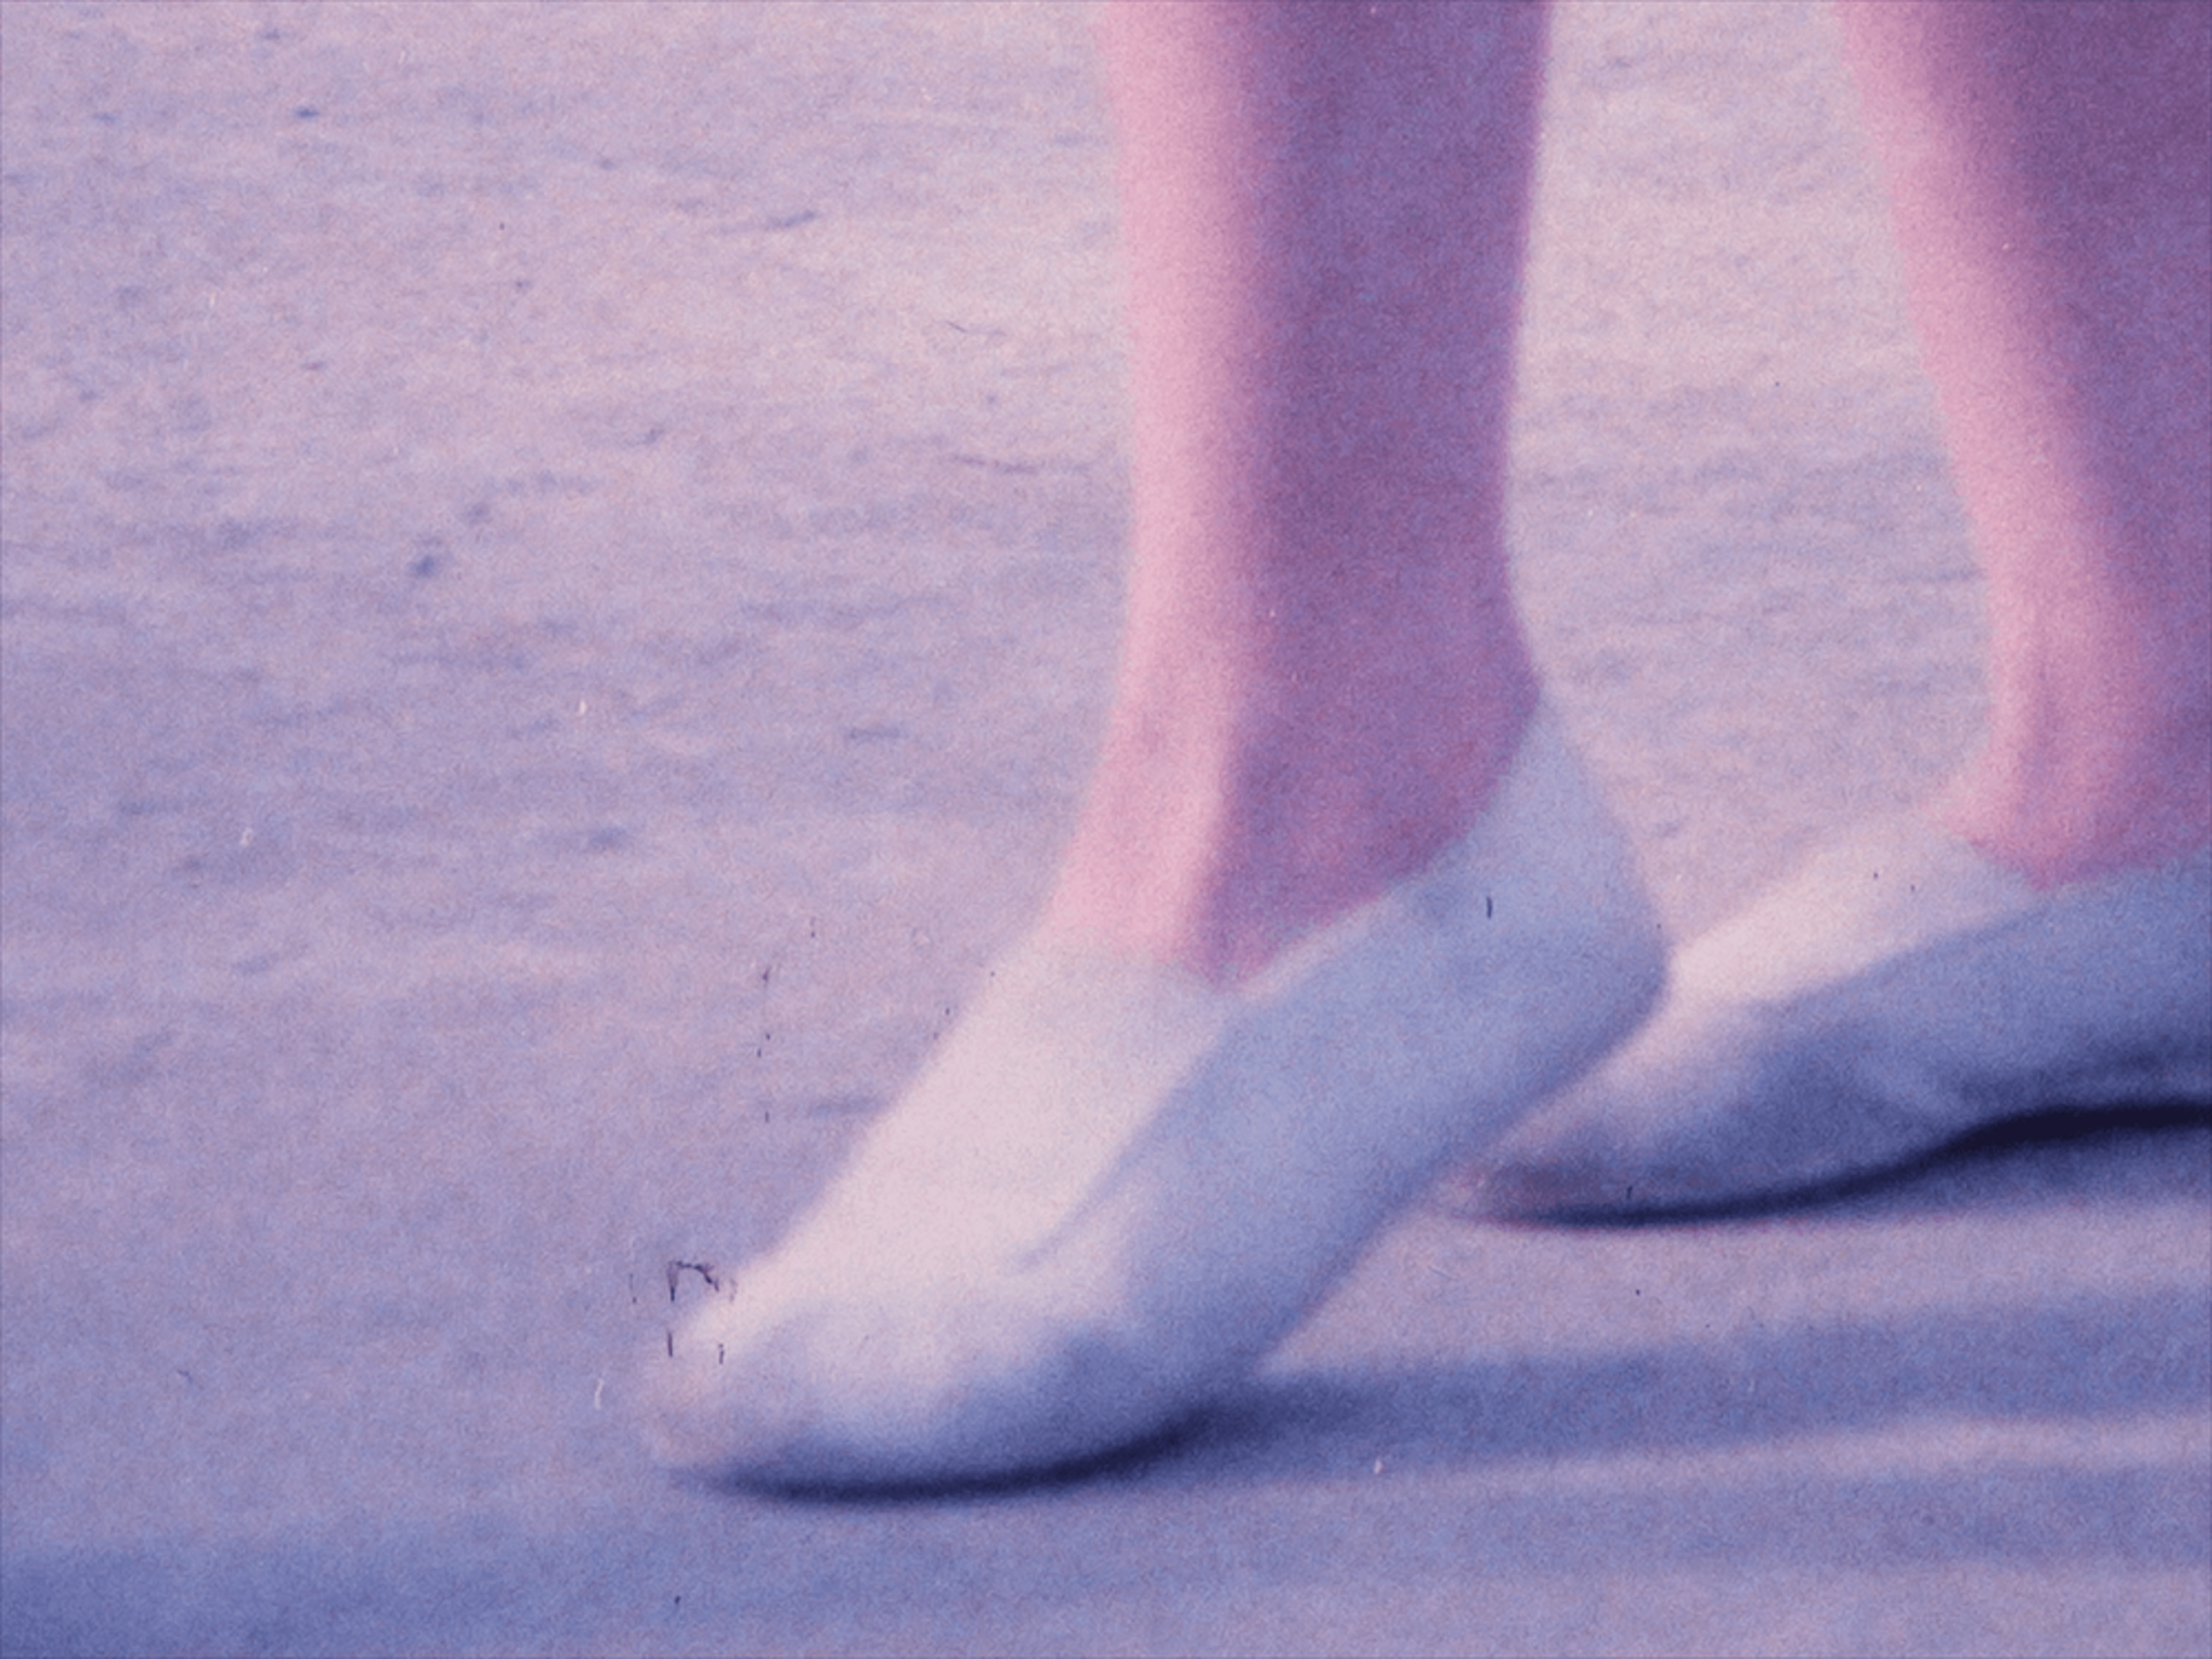 Blue-tinged close-up of a pair of feet wearing white flats, slightly tip-toeing on concrete. 